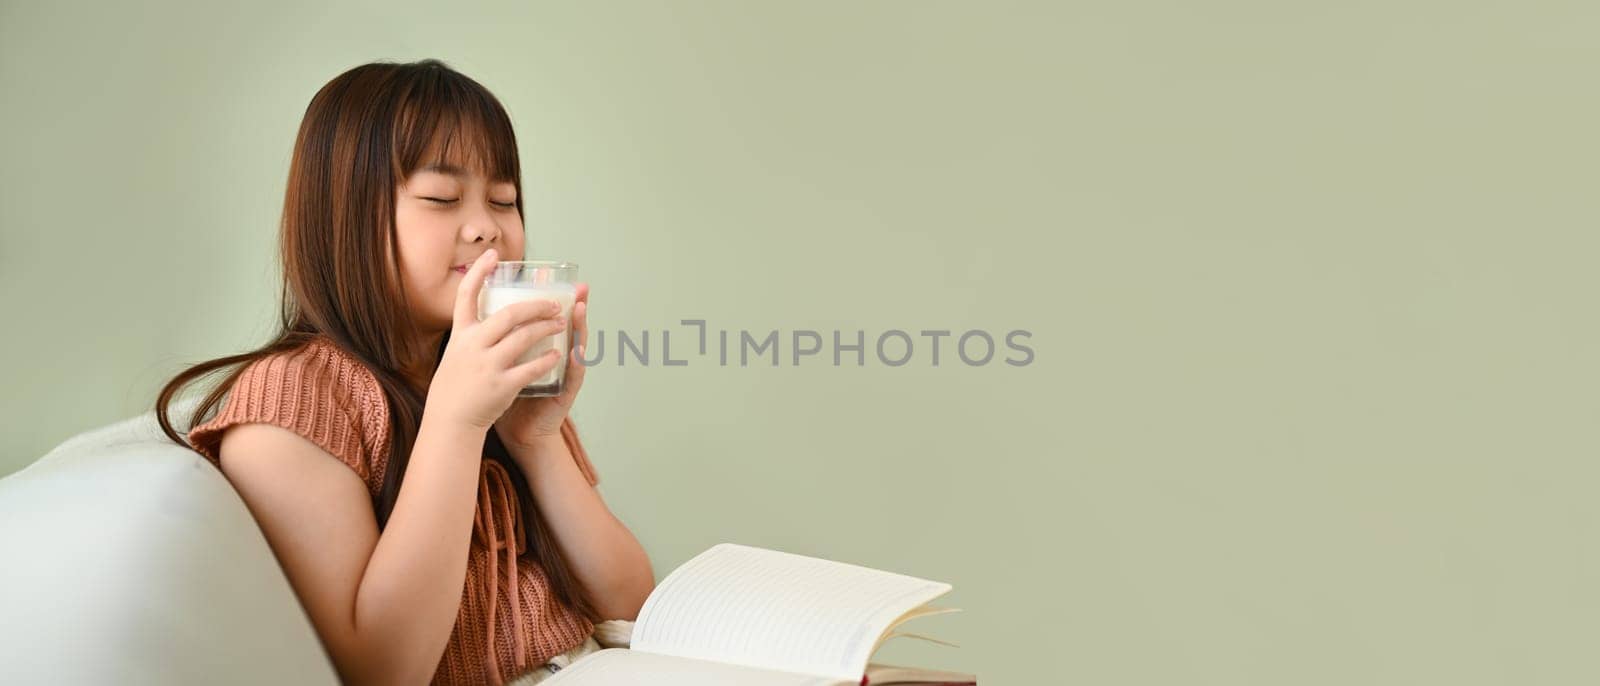 Little cute girl sitting drinking fresh milk in the morning. Calcium source and nutritional value concept